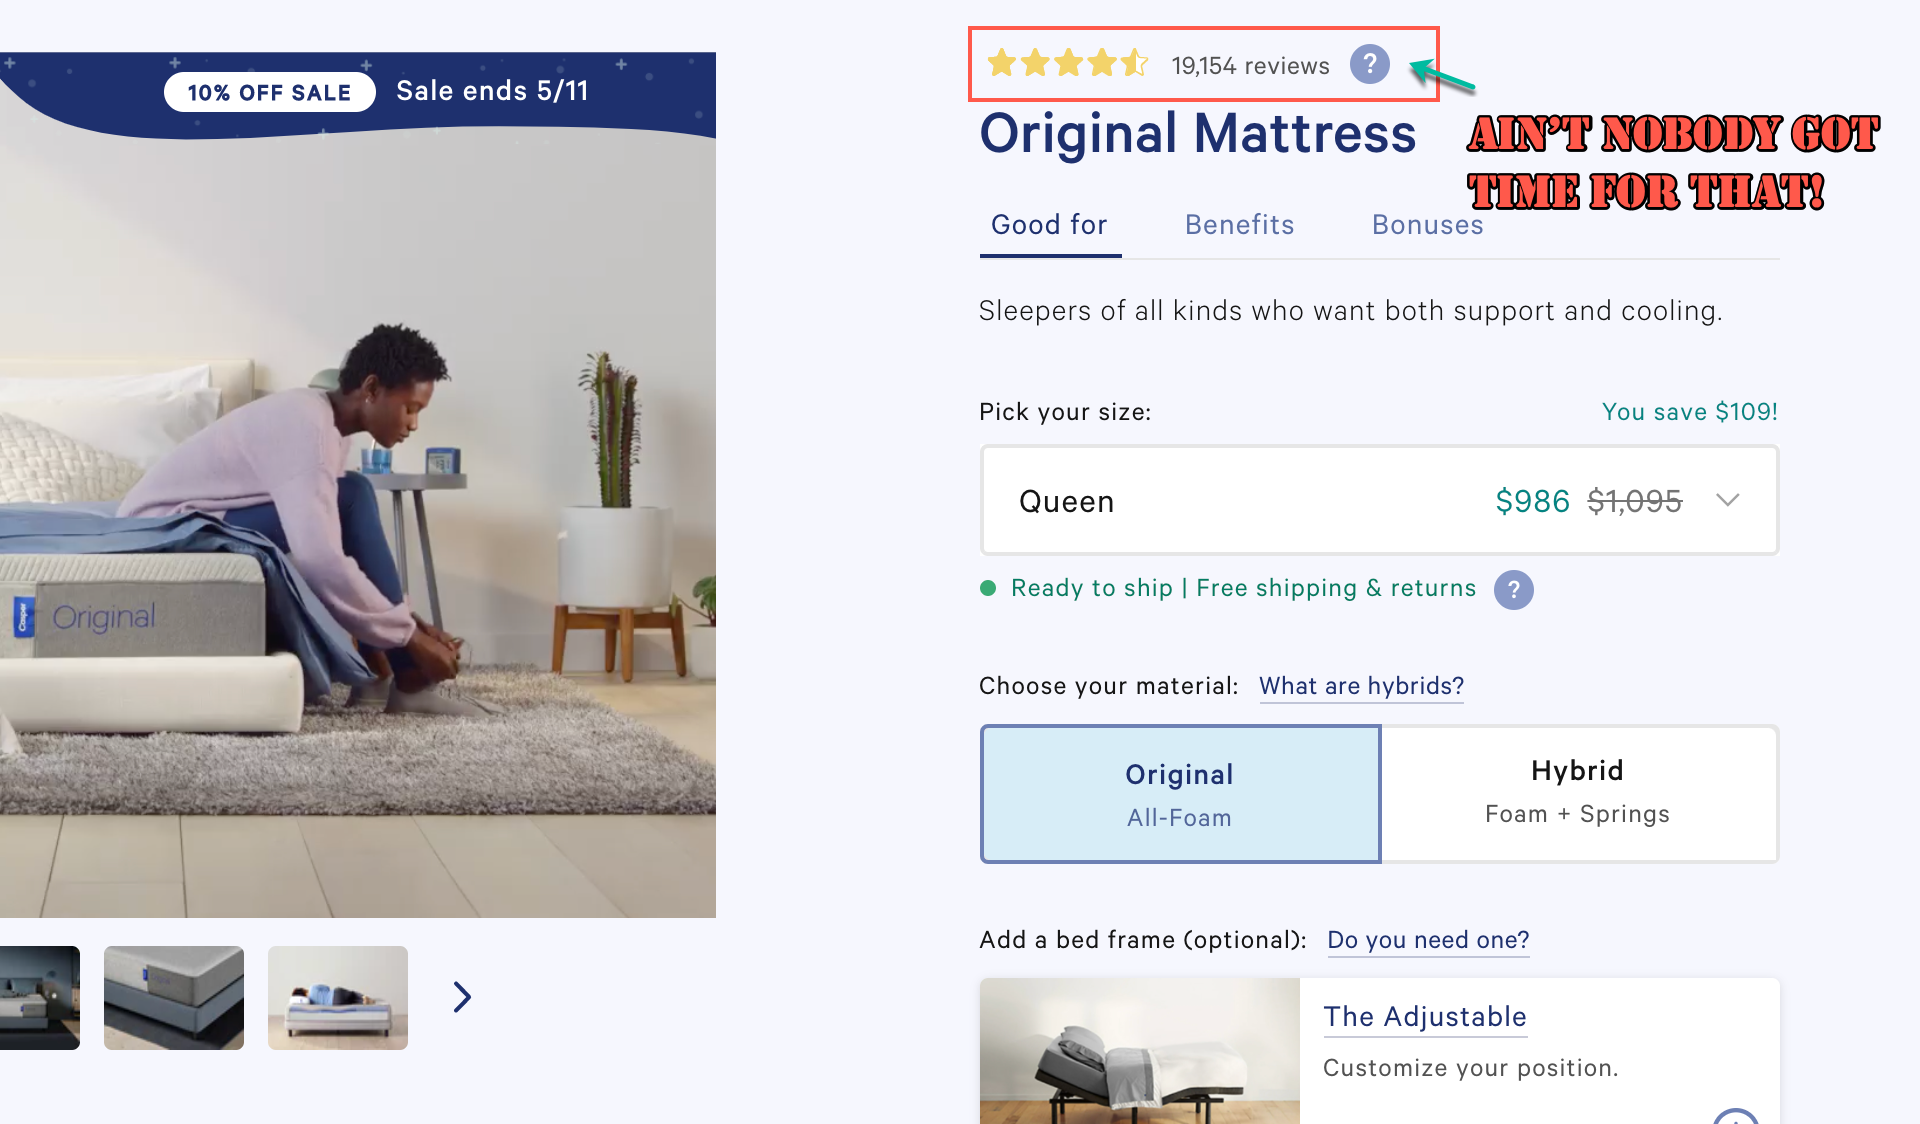 The buyer psychology of product pages with thousands of reviews.